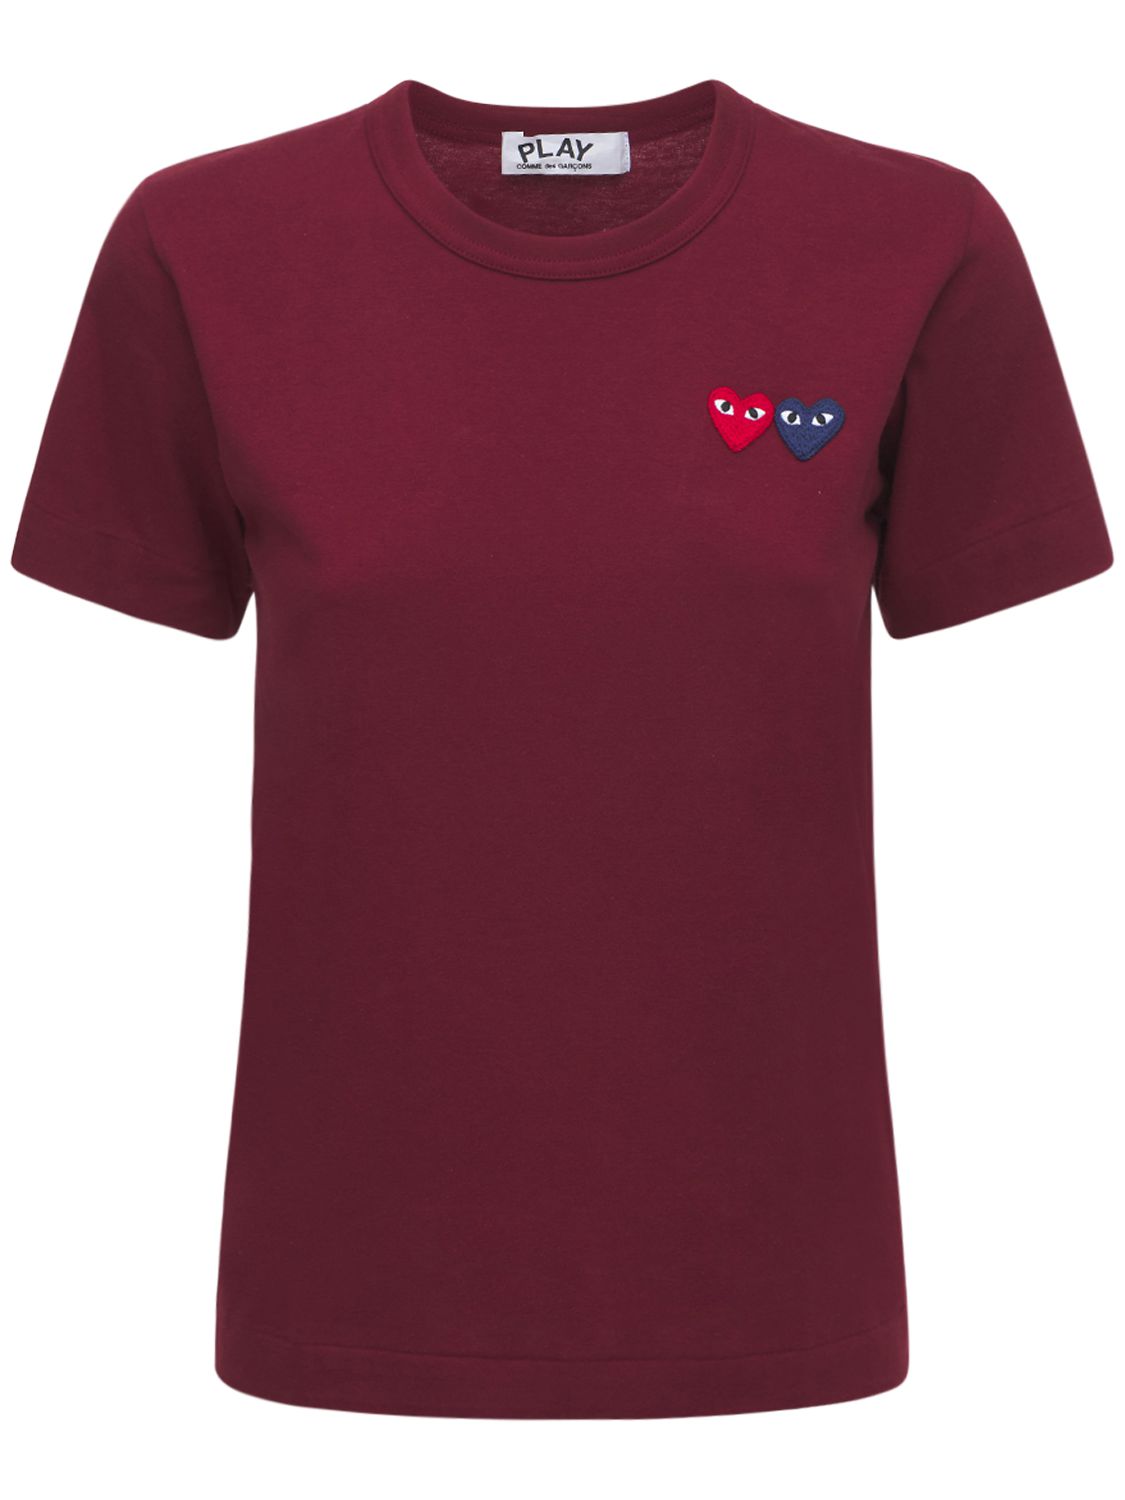 Image of Embroidered Hearts Cotton T-shirt